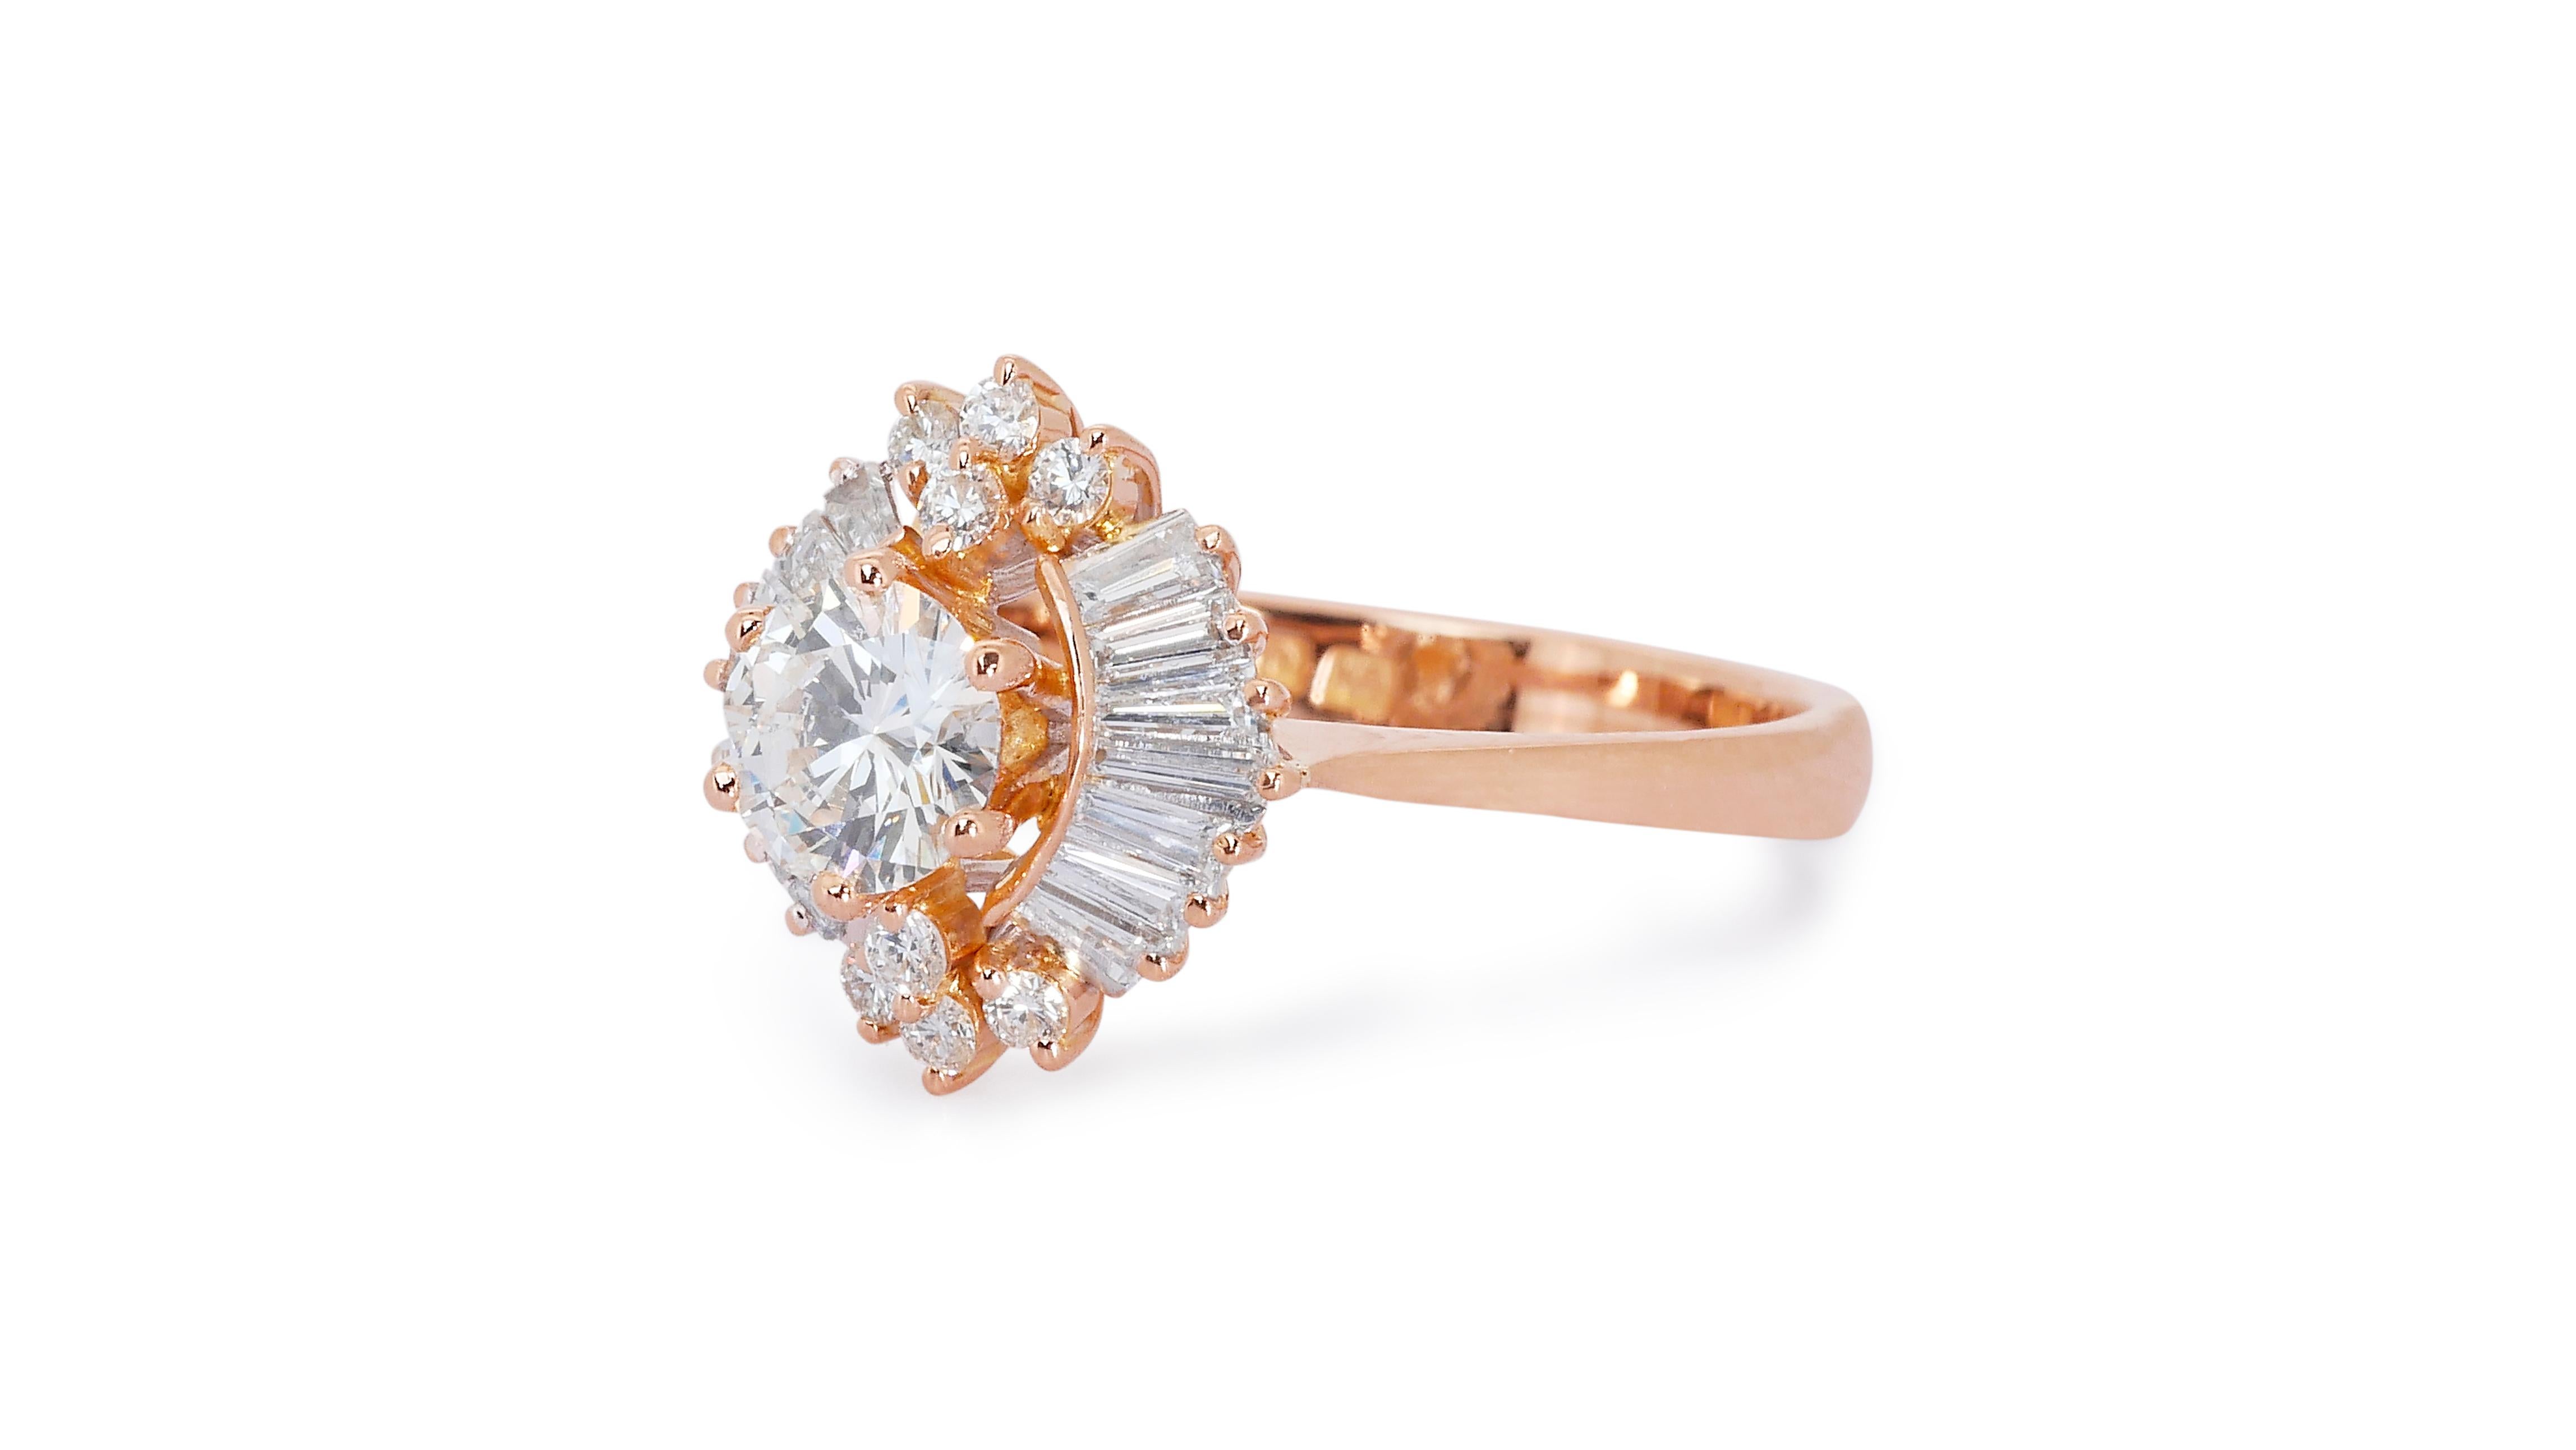 Marvelous 14k Rose Gold Ring w/ 1.46 Carat Natural Diamonds GIA Certificate For Sale 3